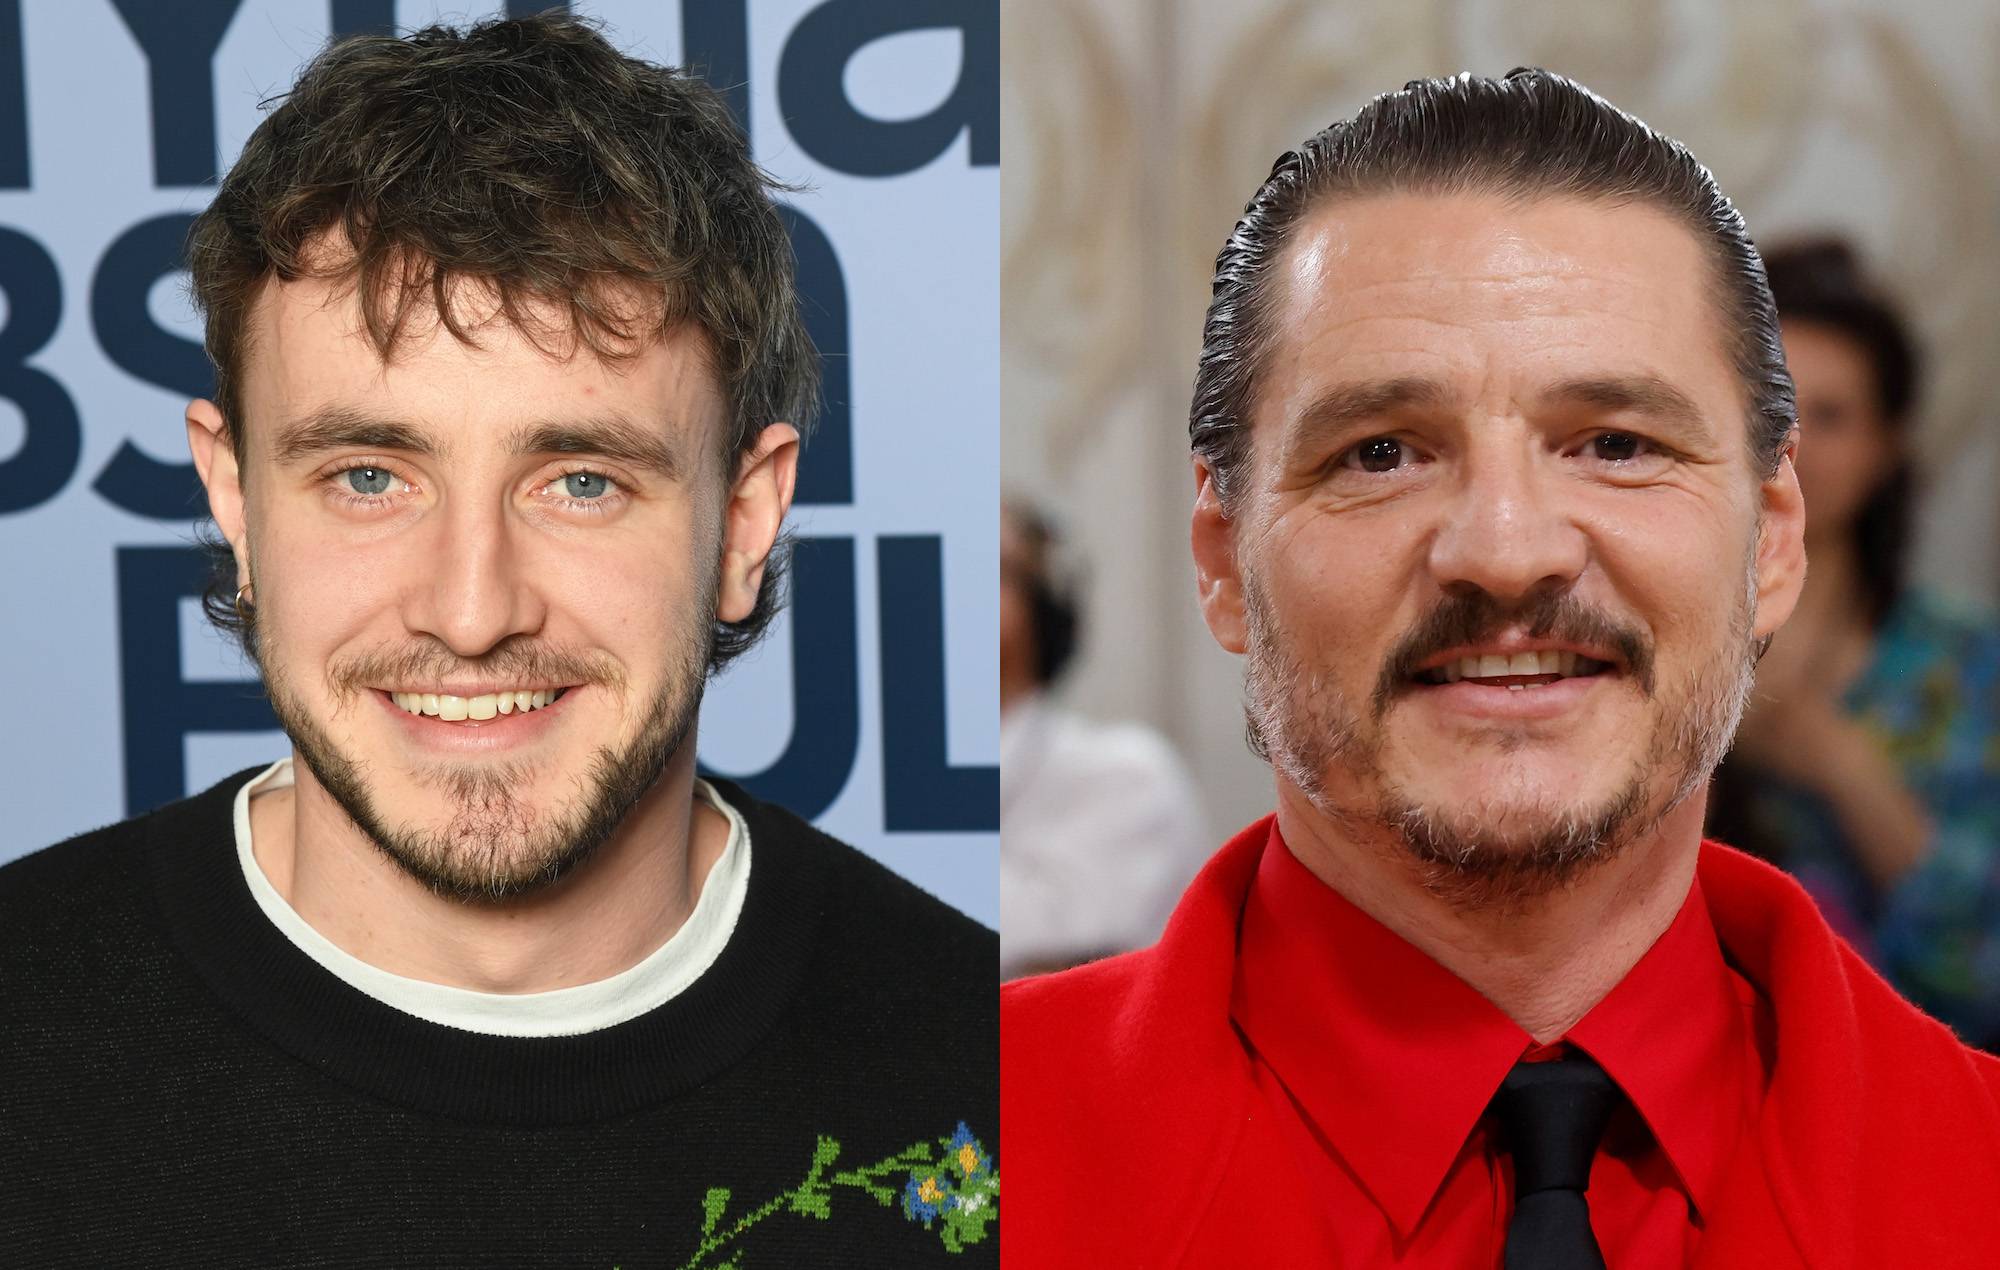 Paul Mescal was “too afraid” to approach Pedro Pascal on ‘Gladiator 2’ set